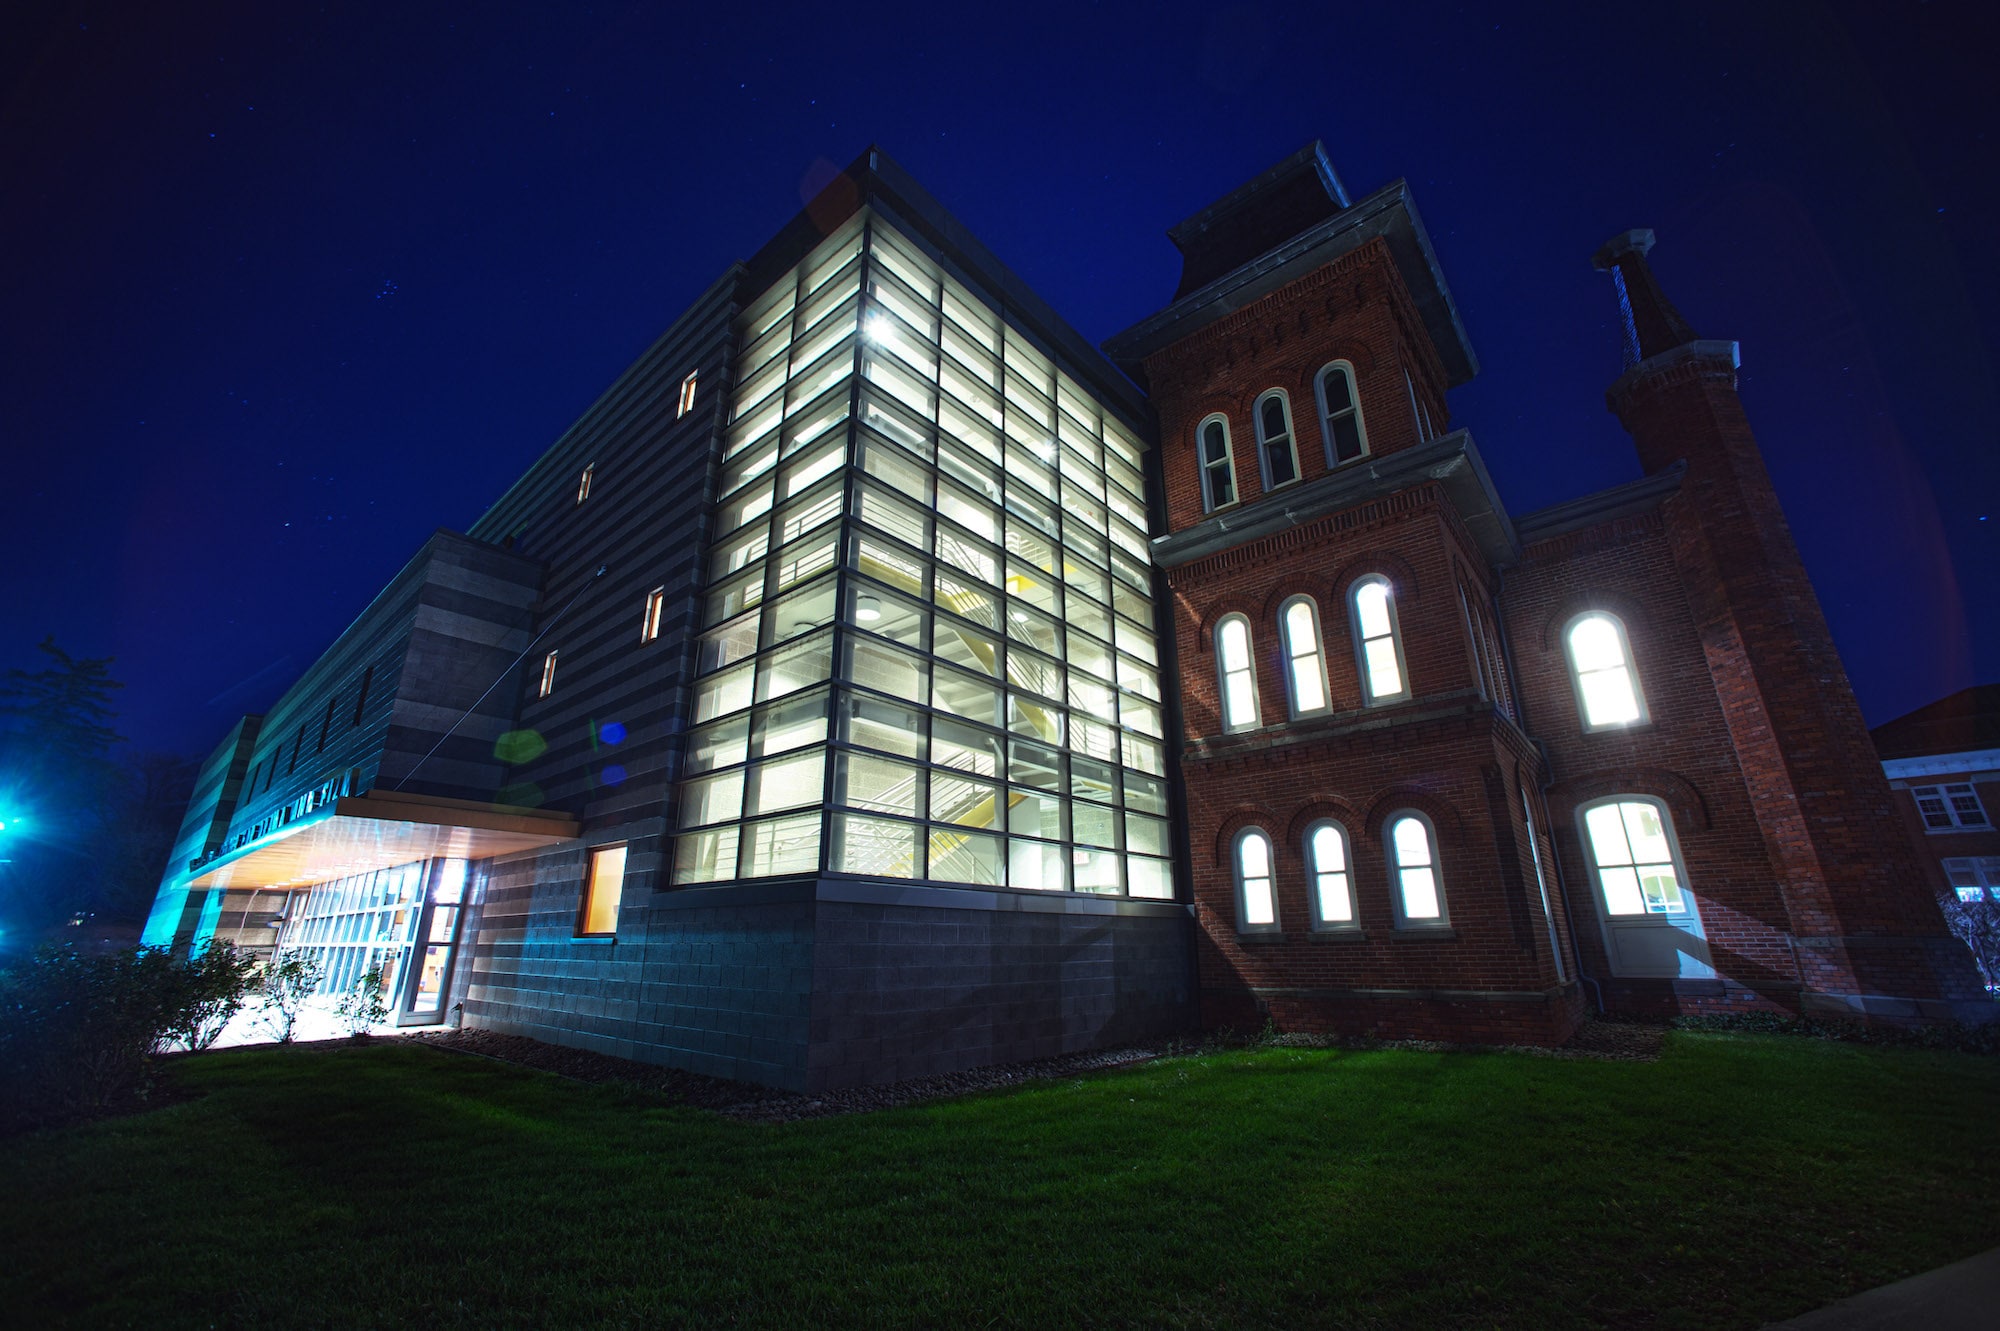 A photo taken at night of the Volgelstein Center for Drama and Film, facing the north corner